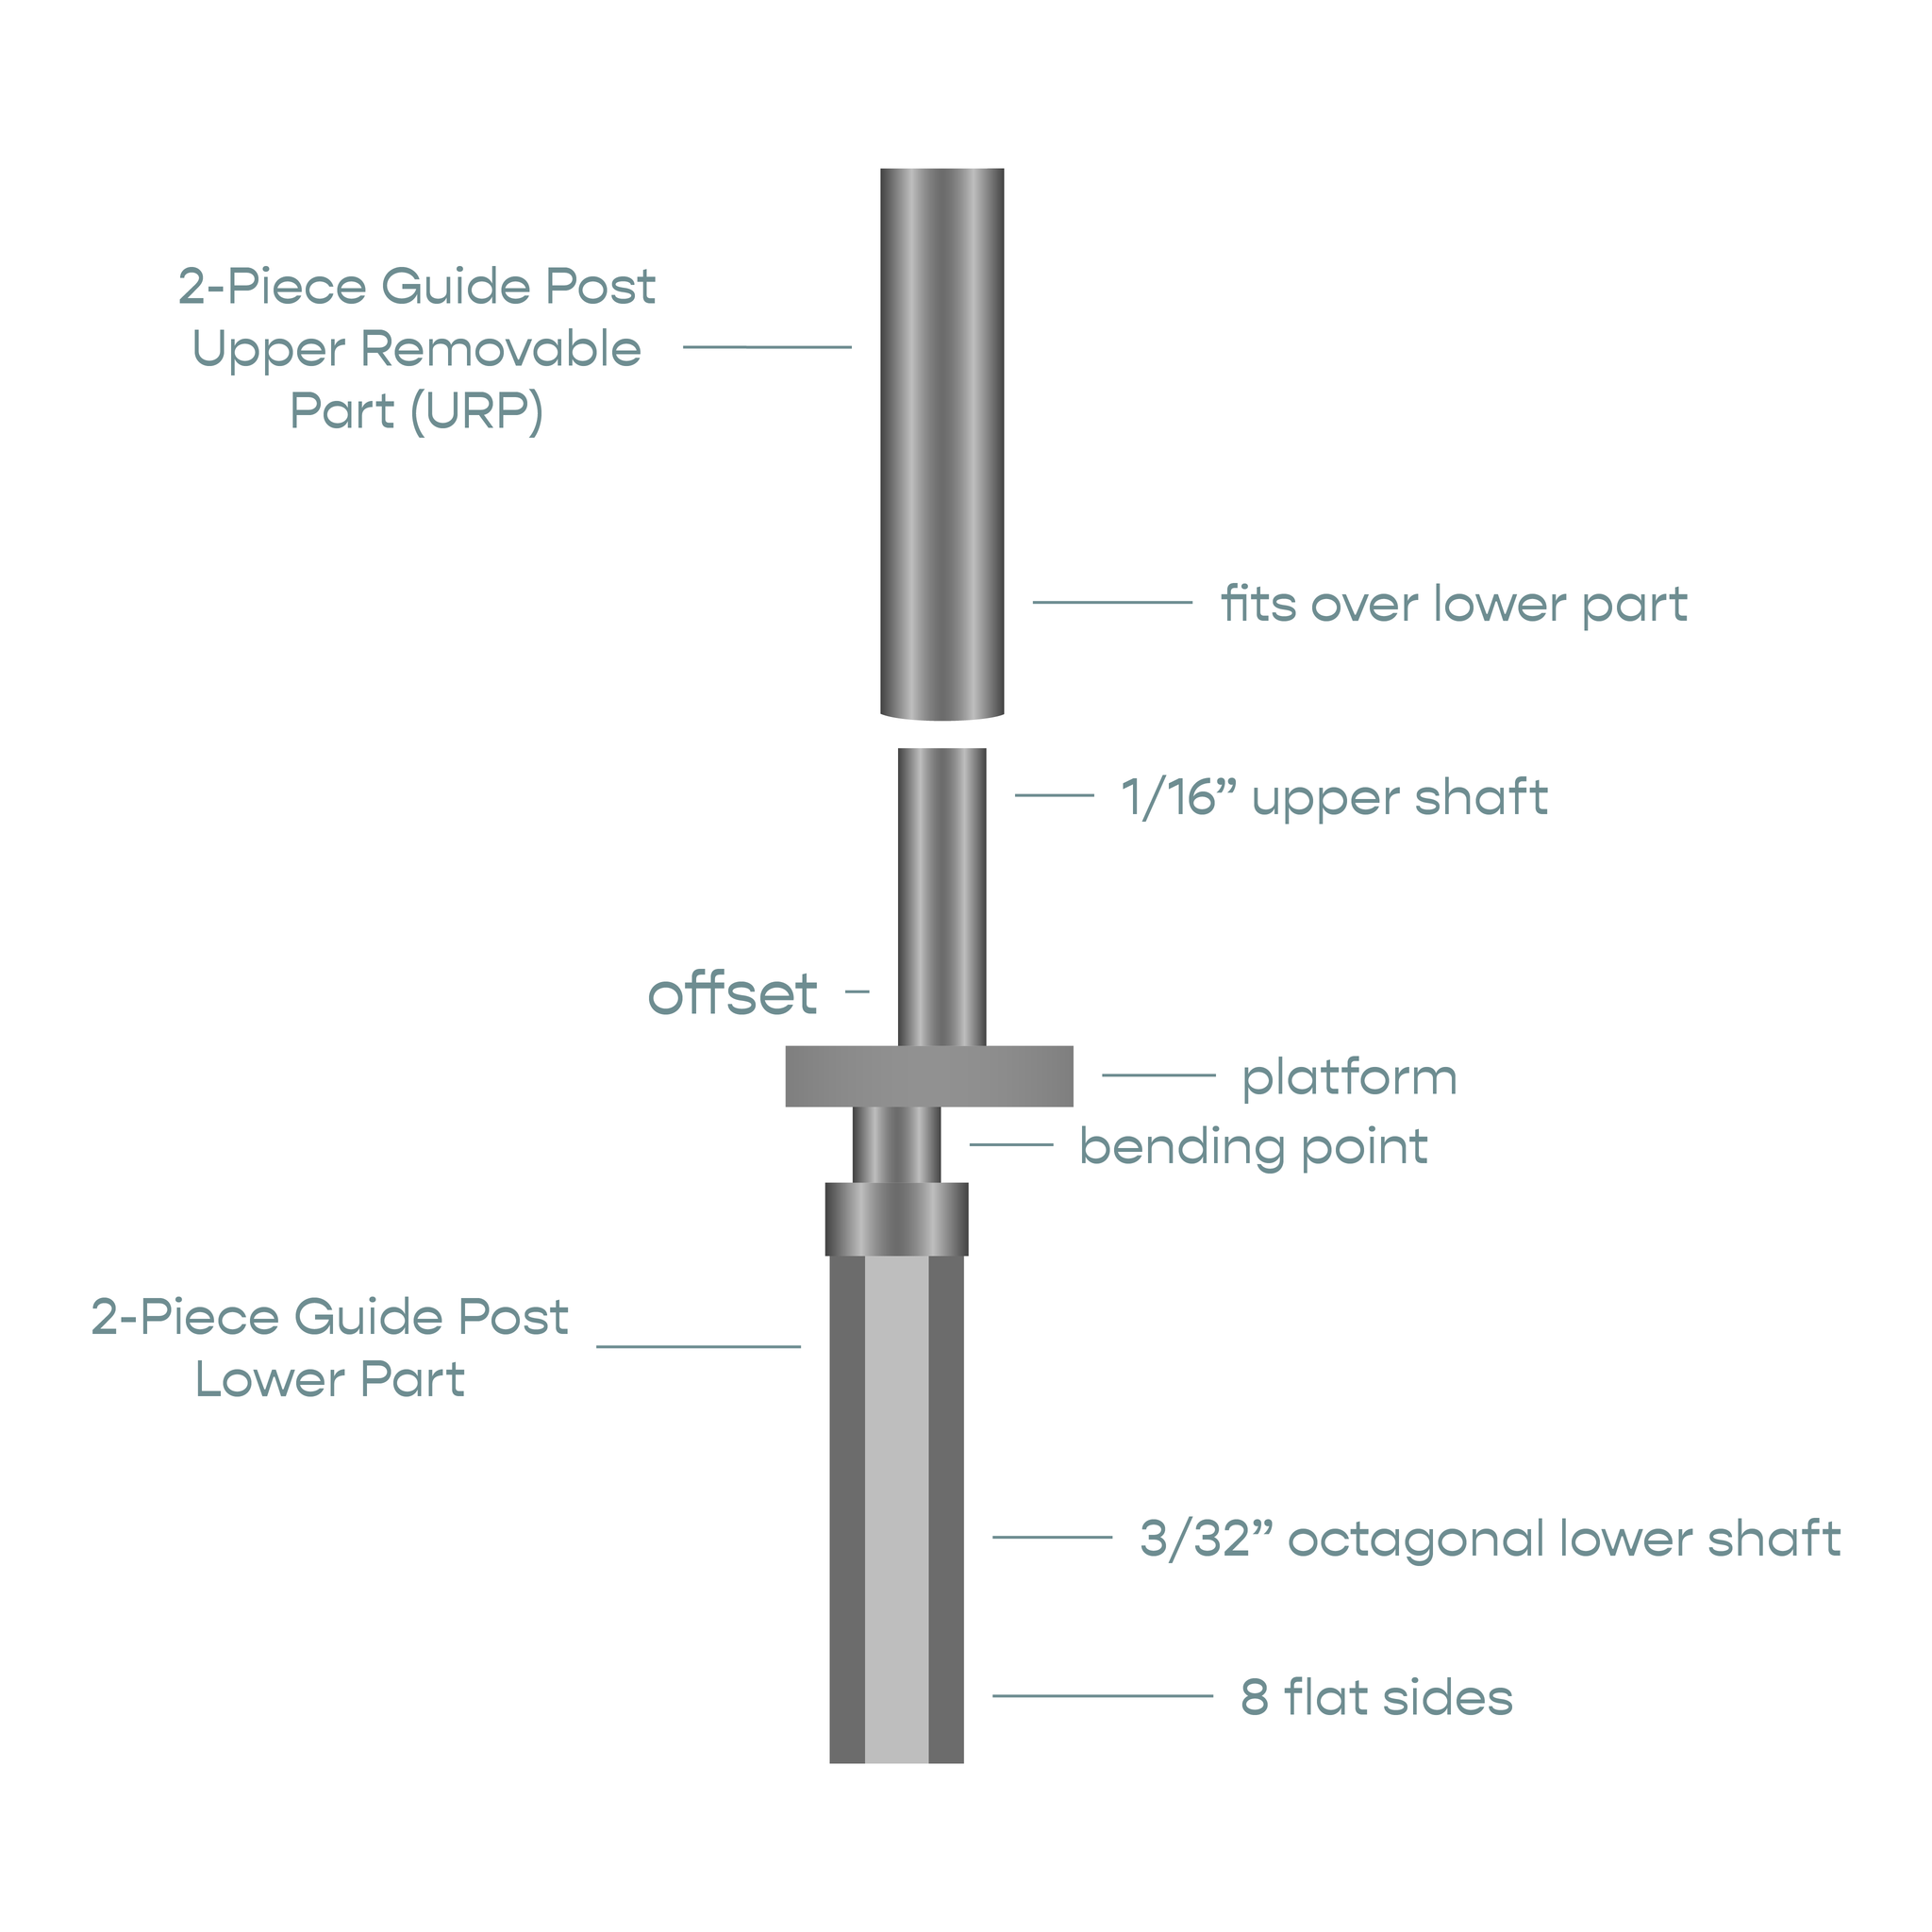 2-Piece Guide Post - 2.5 mm Offset Lower Part